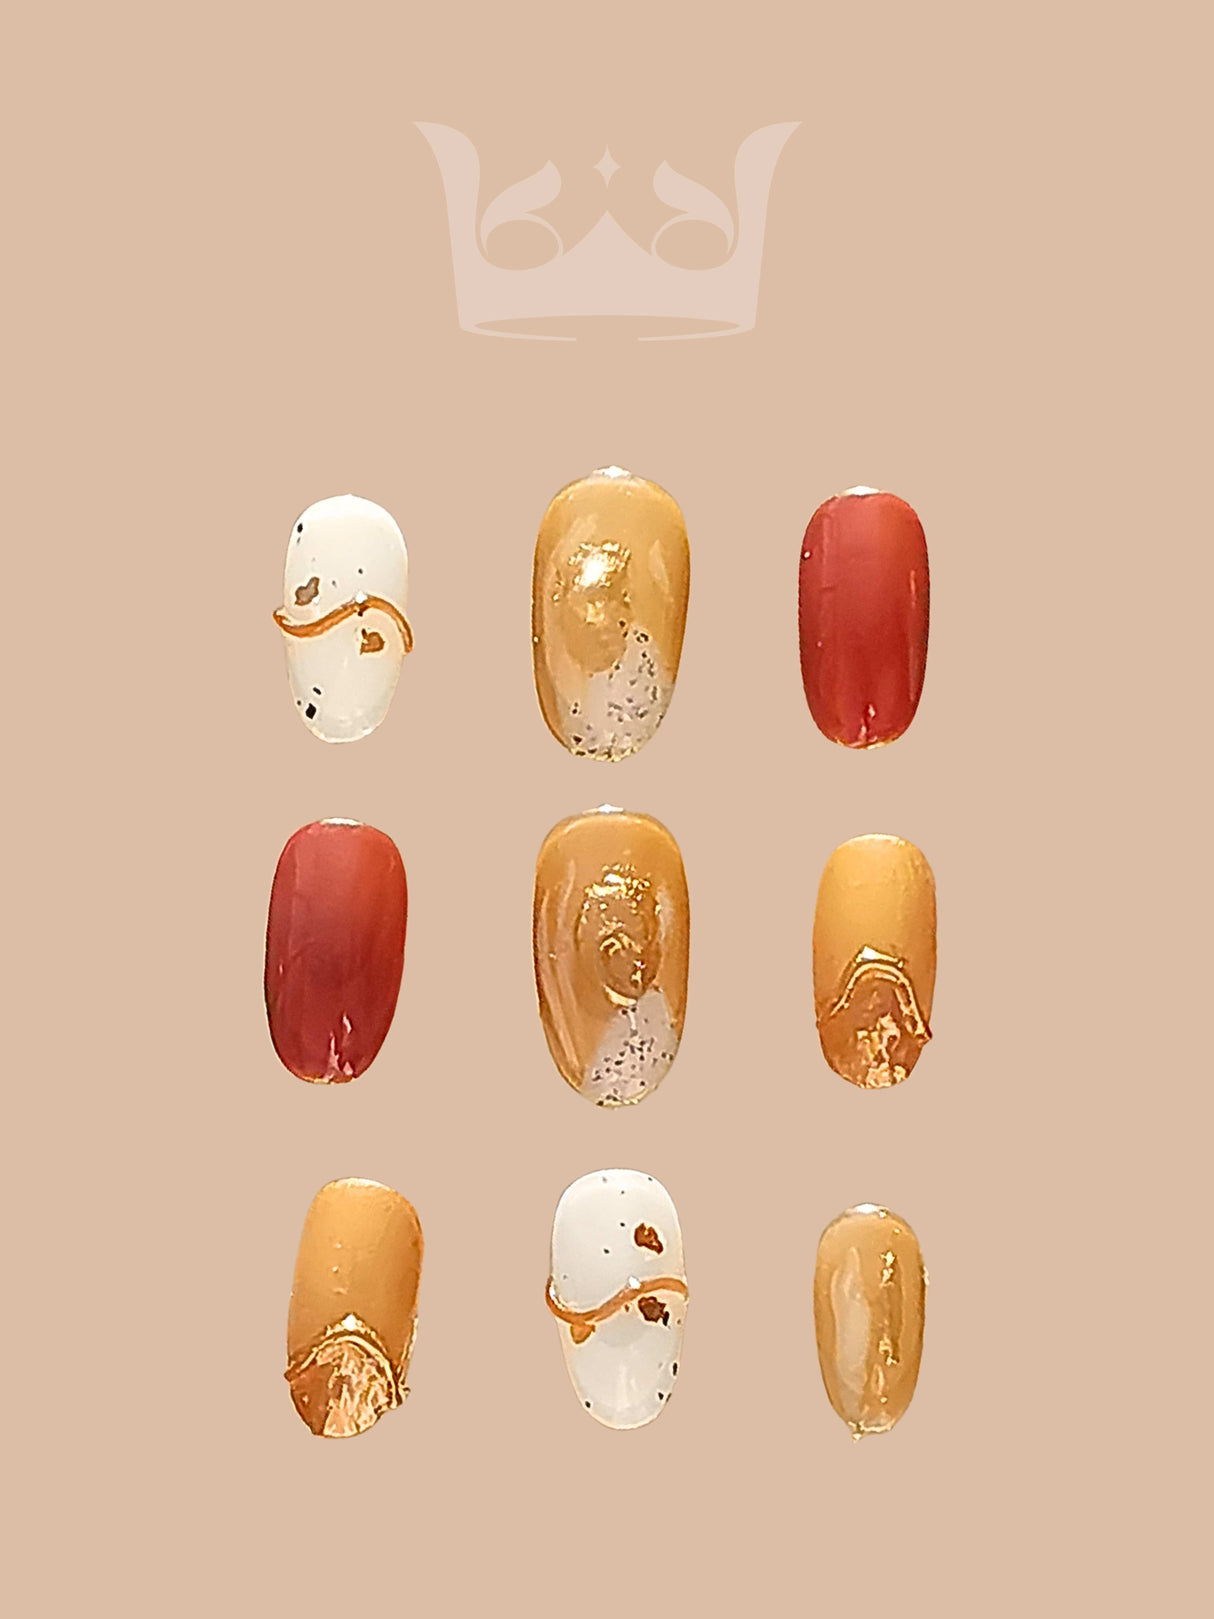 These elegant nails are perfect for formal occasions or photoshoots, with customizable designs featuring minimalist art, metallic finishes, and bold colors.